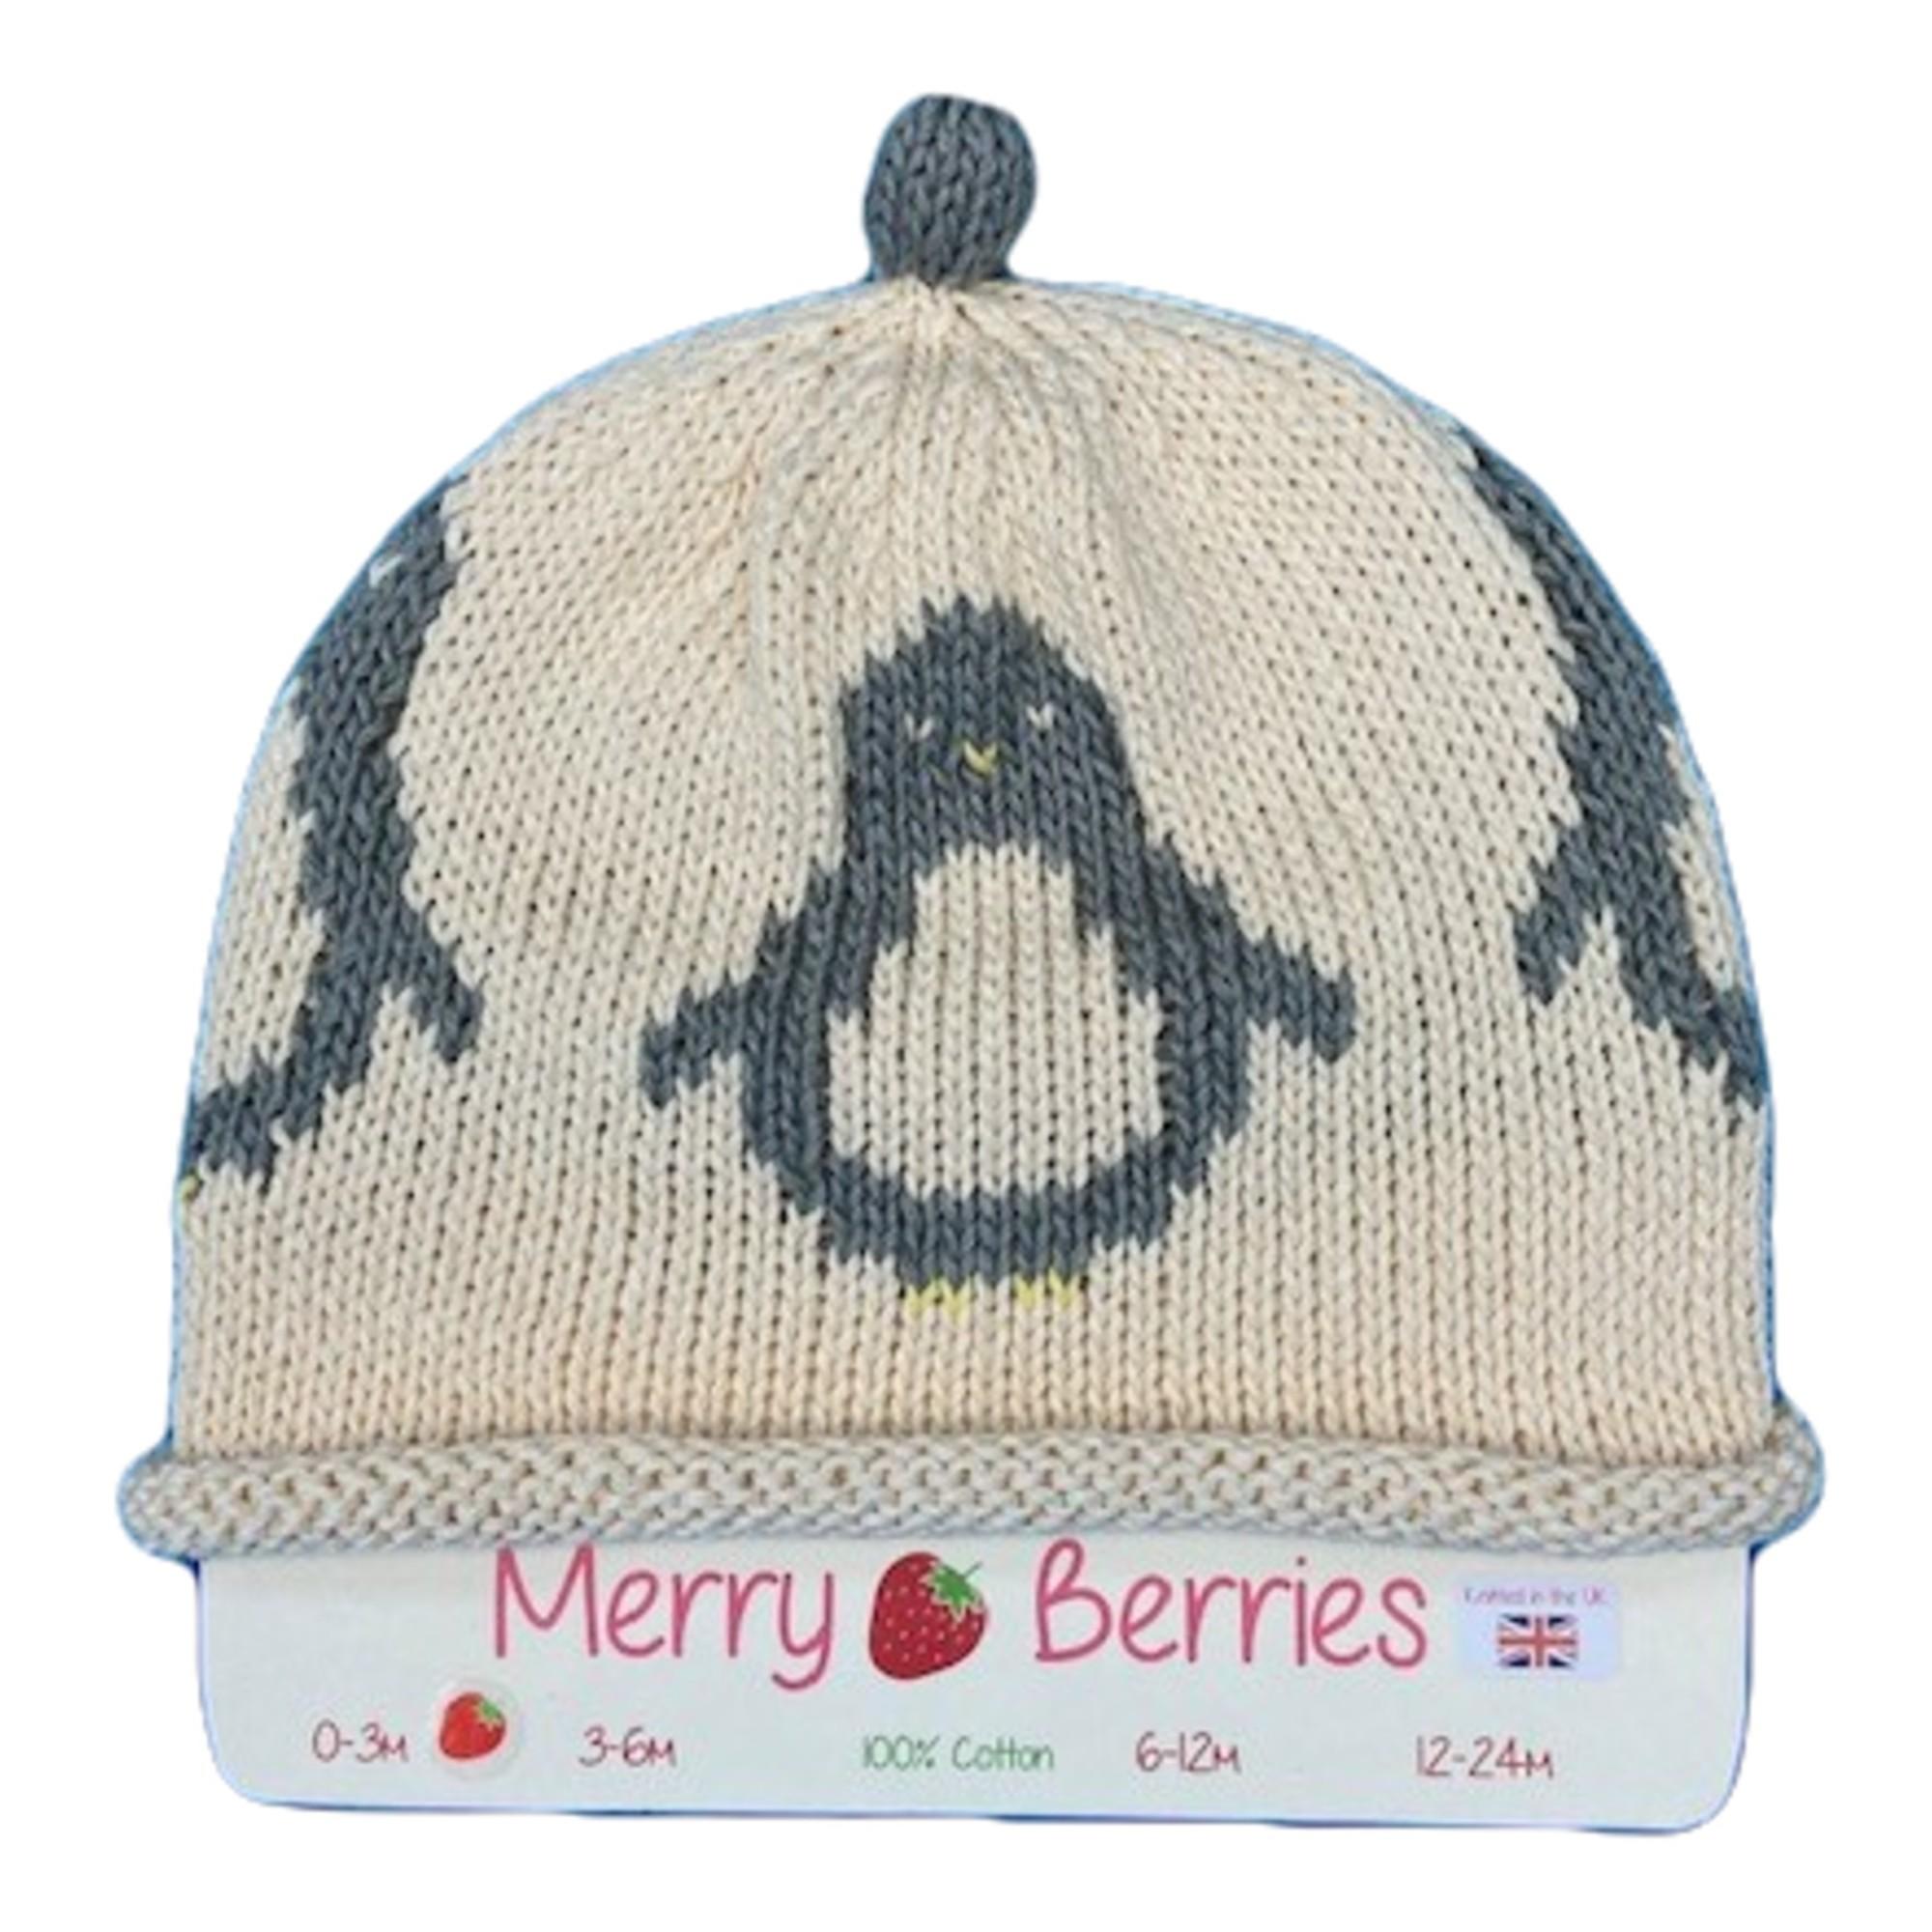 Merry Berries - Grey Penguin Knitted baby Hat-0-24mths-Cotton